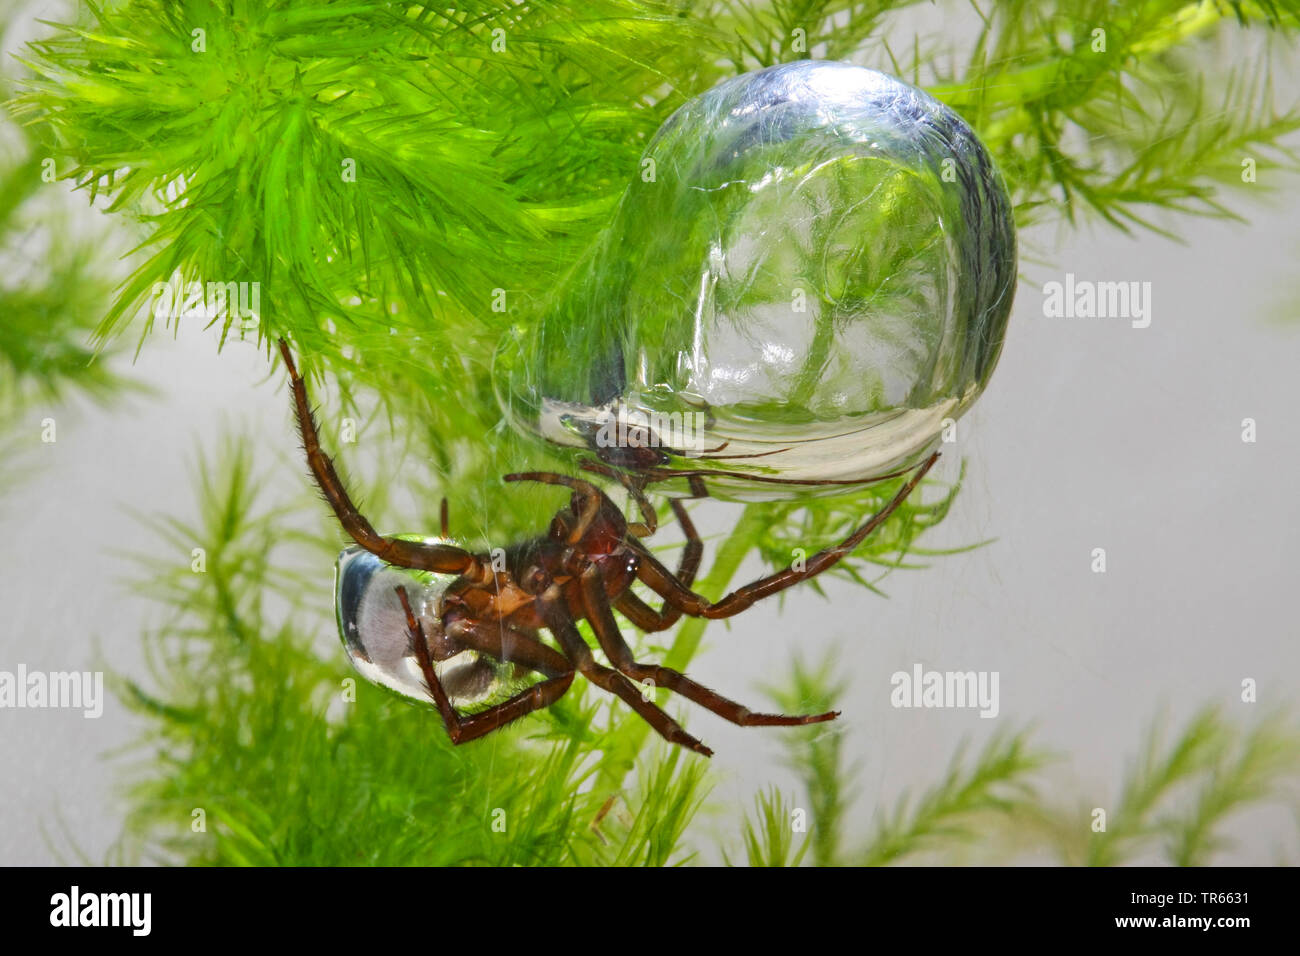 European water spider (Argyroneta aquatica), with diving bell, air bubble under water, Germany Stock Photo